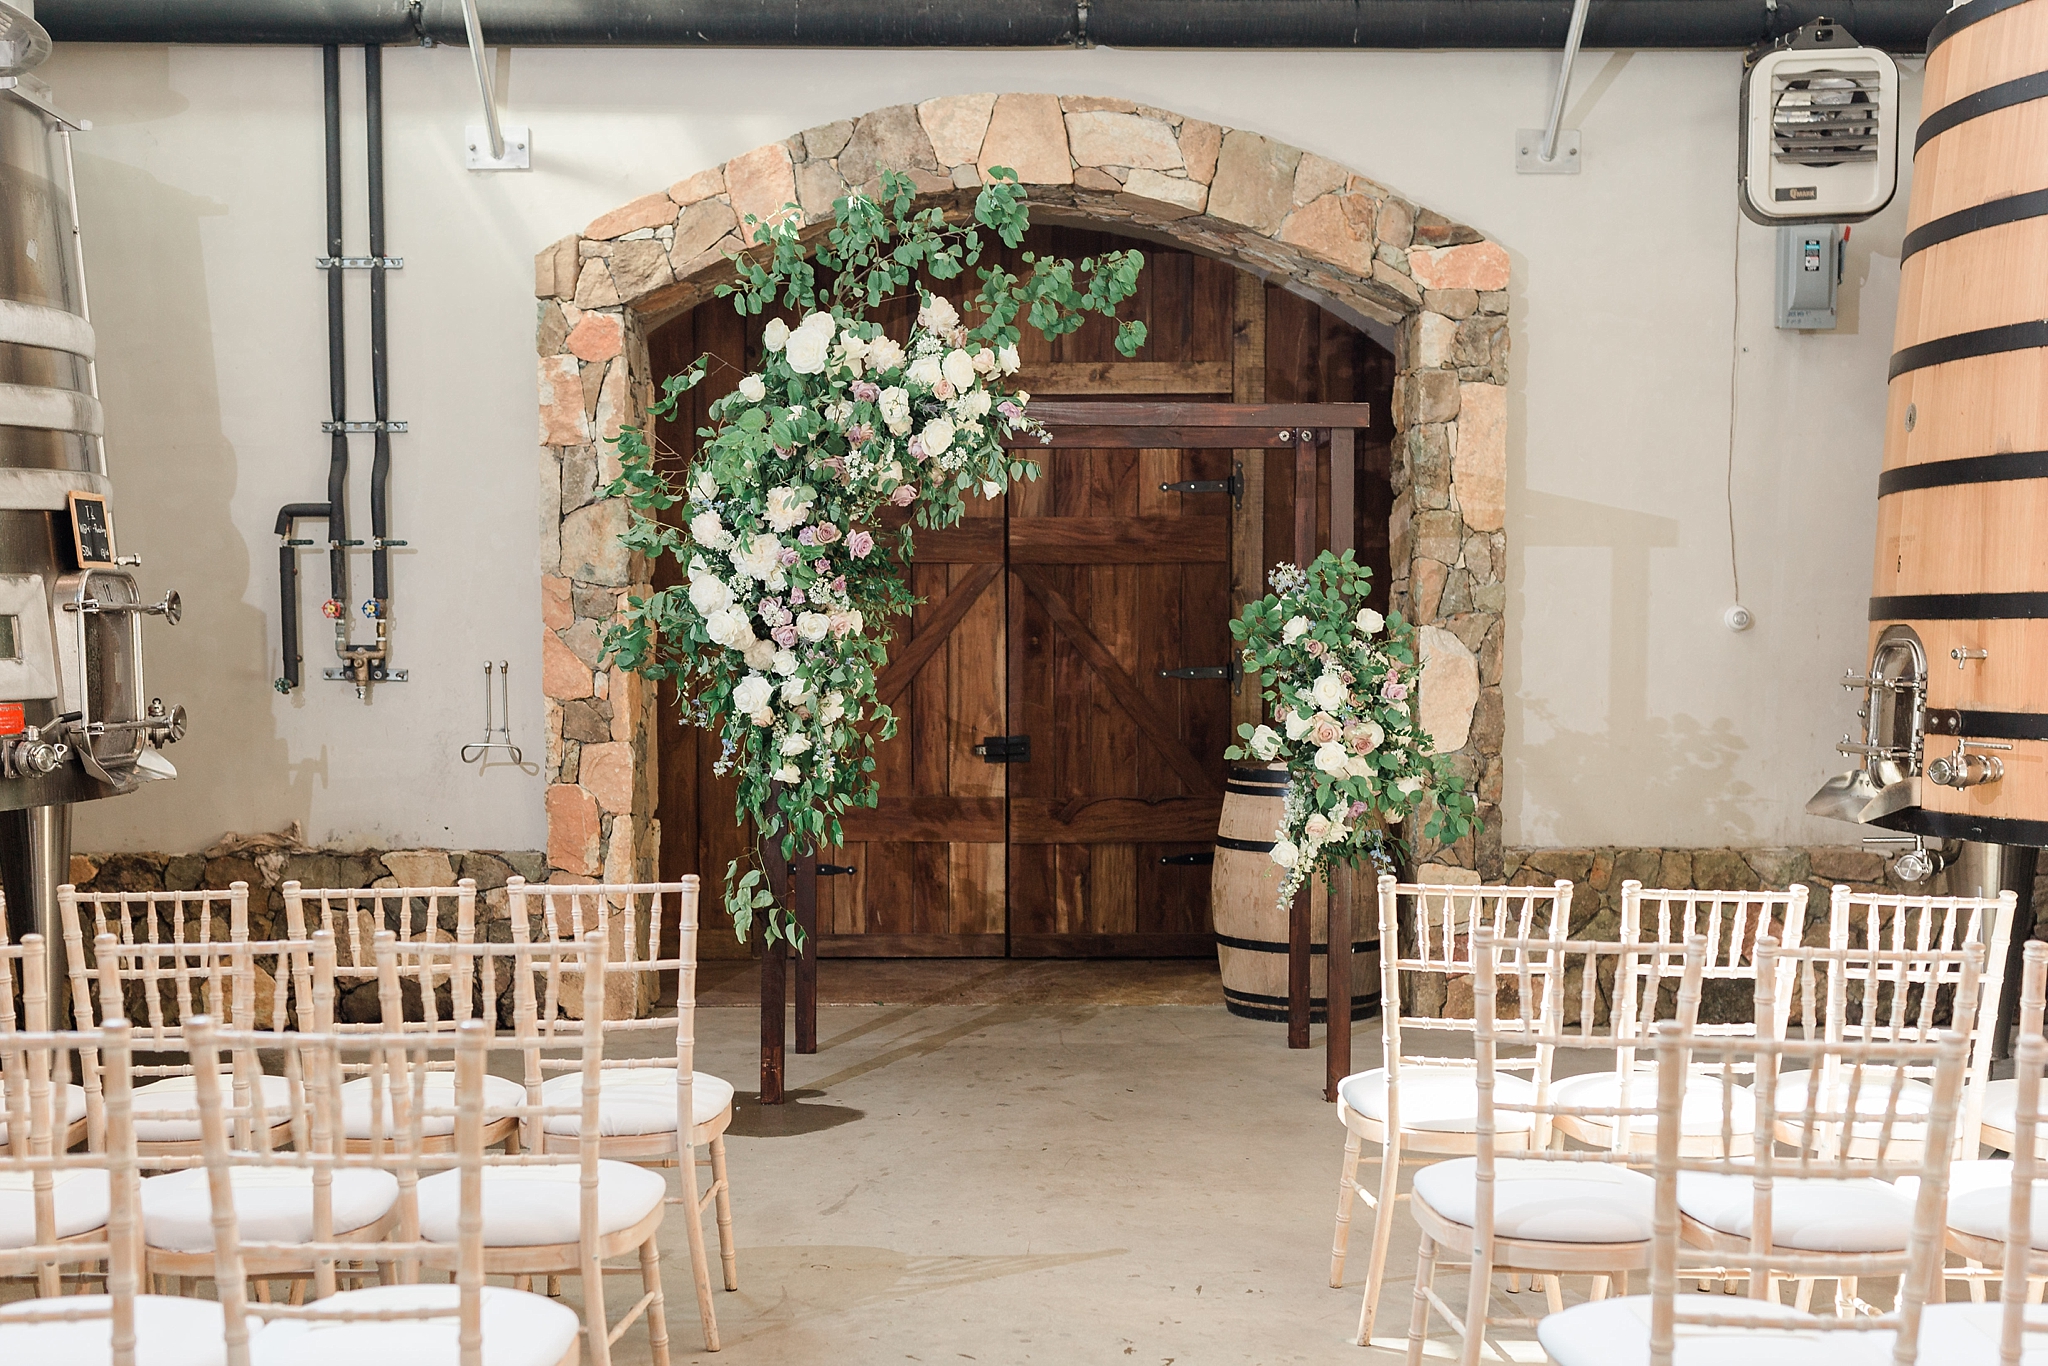 This Stone Tower Winery wedding was truly out of a fairytale! The entire day was designed by Caroline Dutton Events and photographed by Alicia Lacey.